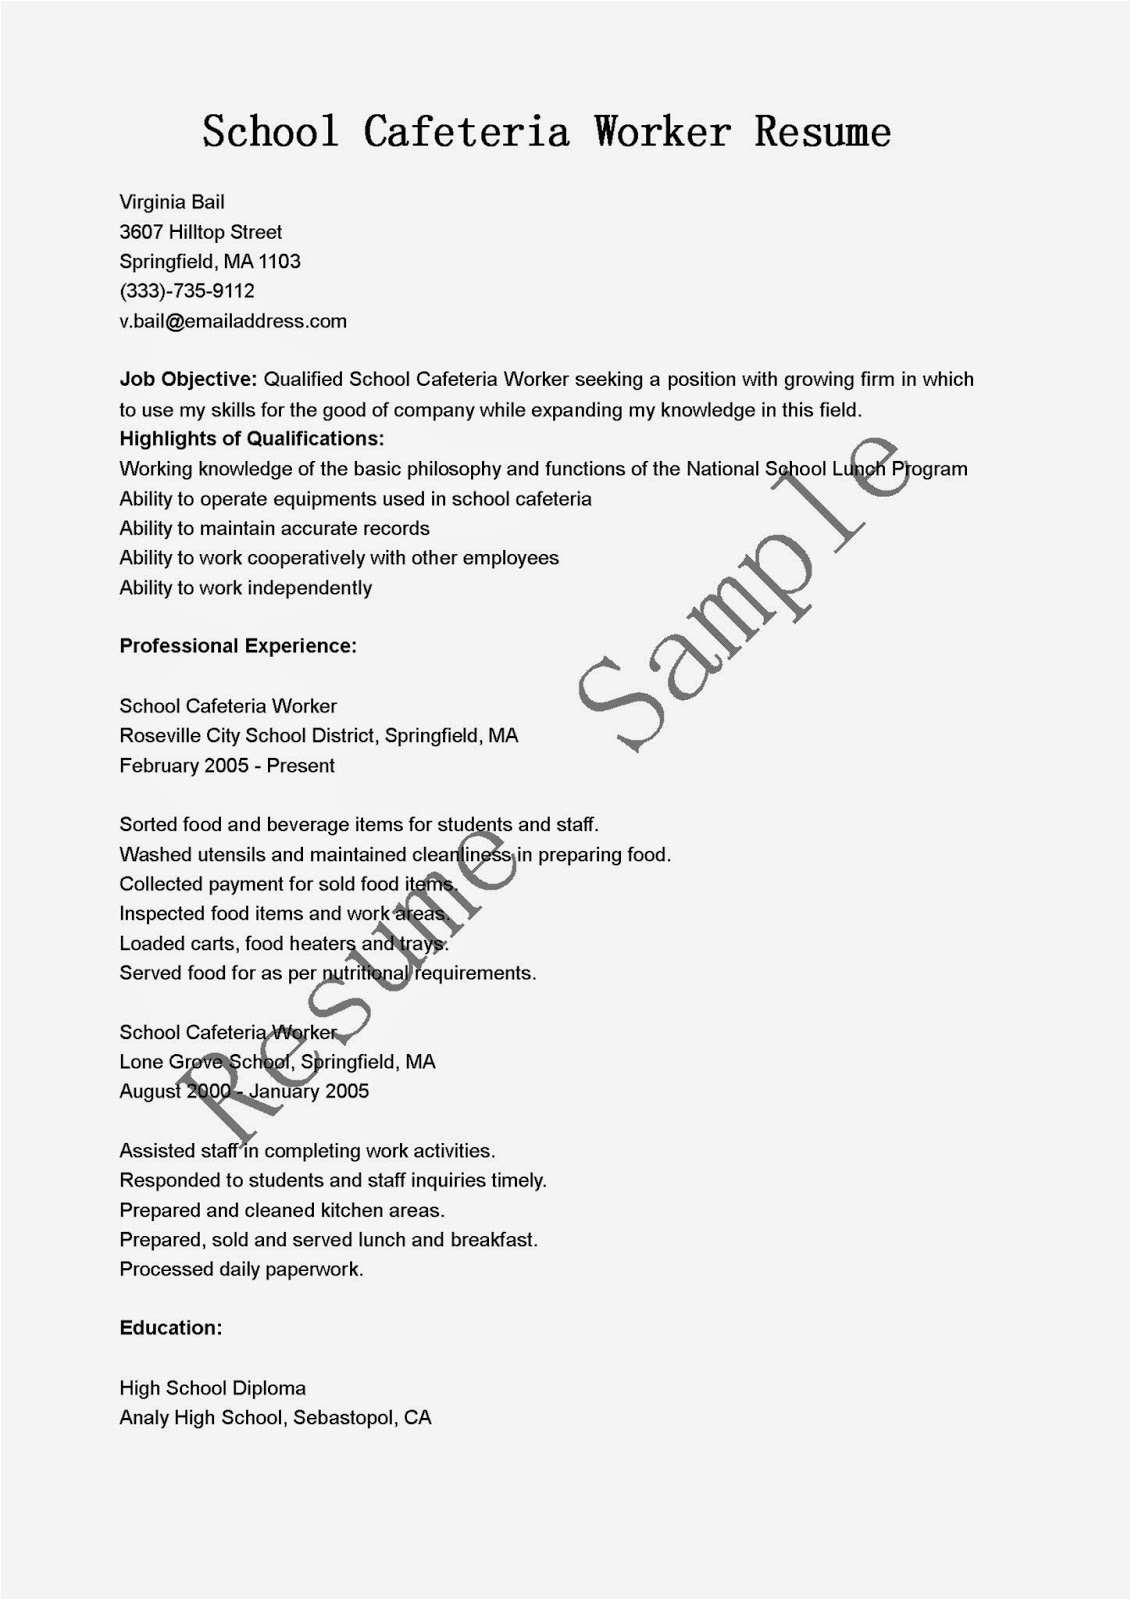 Free Sample Resume for Cafeteria Worker Resume Samples School Cafeteria Worker Resume Sample